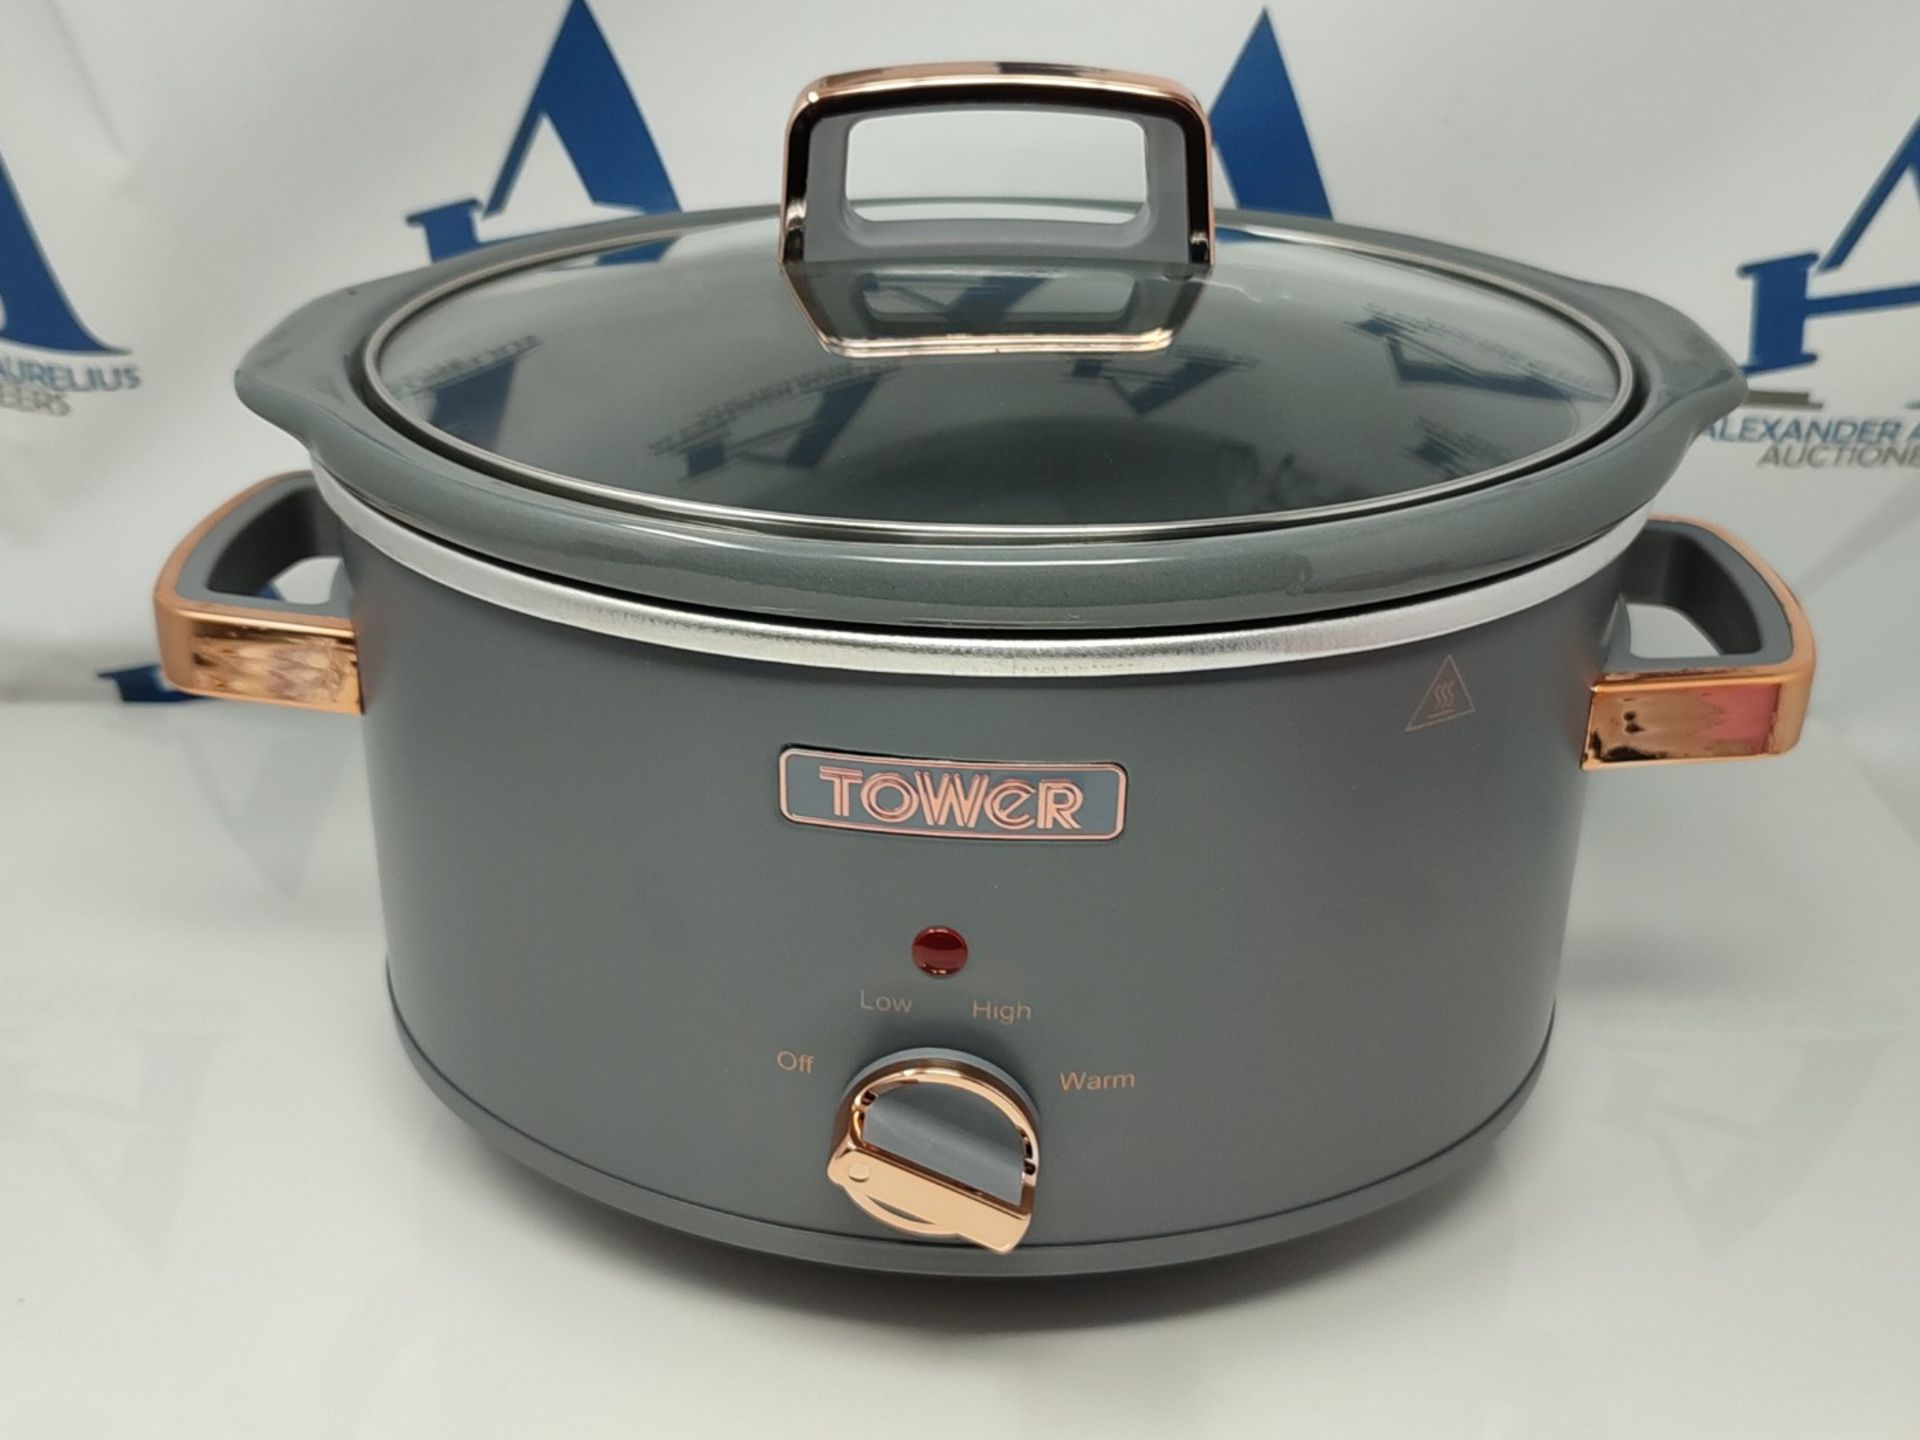 Tower T16042GRY Cavaletto 3.5 Litre Slow Cooker with 3 Heat Settings, Removable Pot an - Image 3 of 3